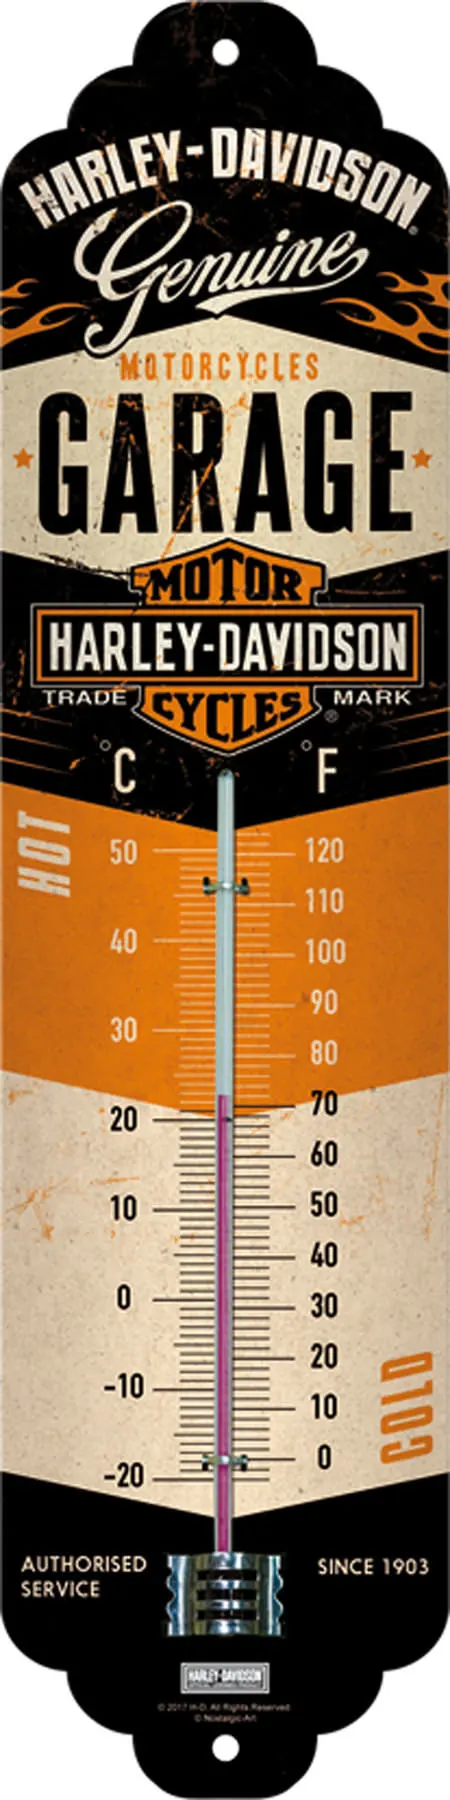 H-D GARAGE THERMOMETER